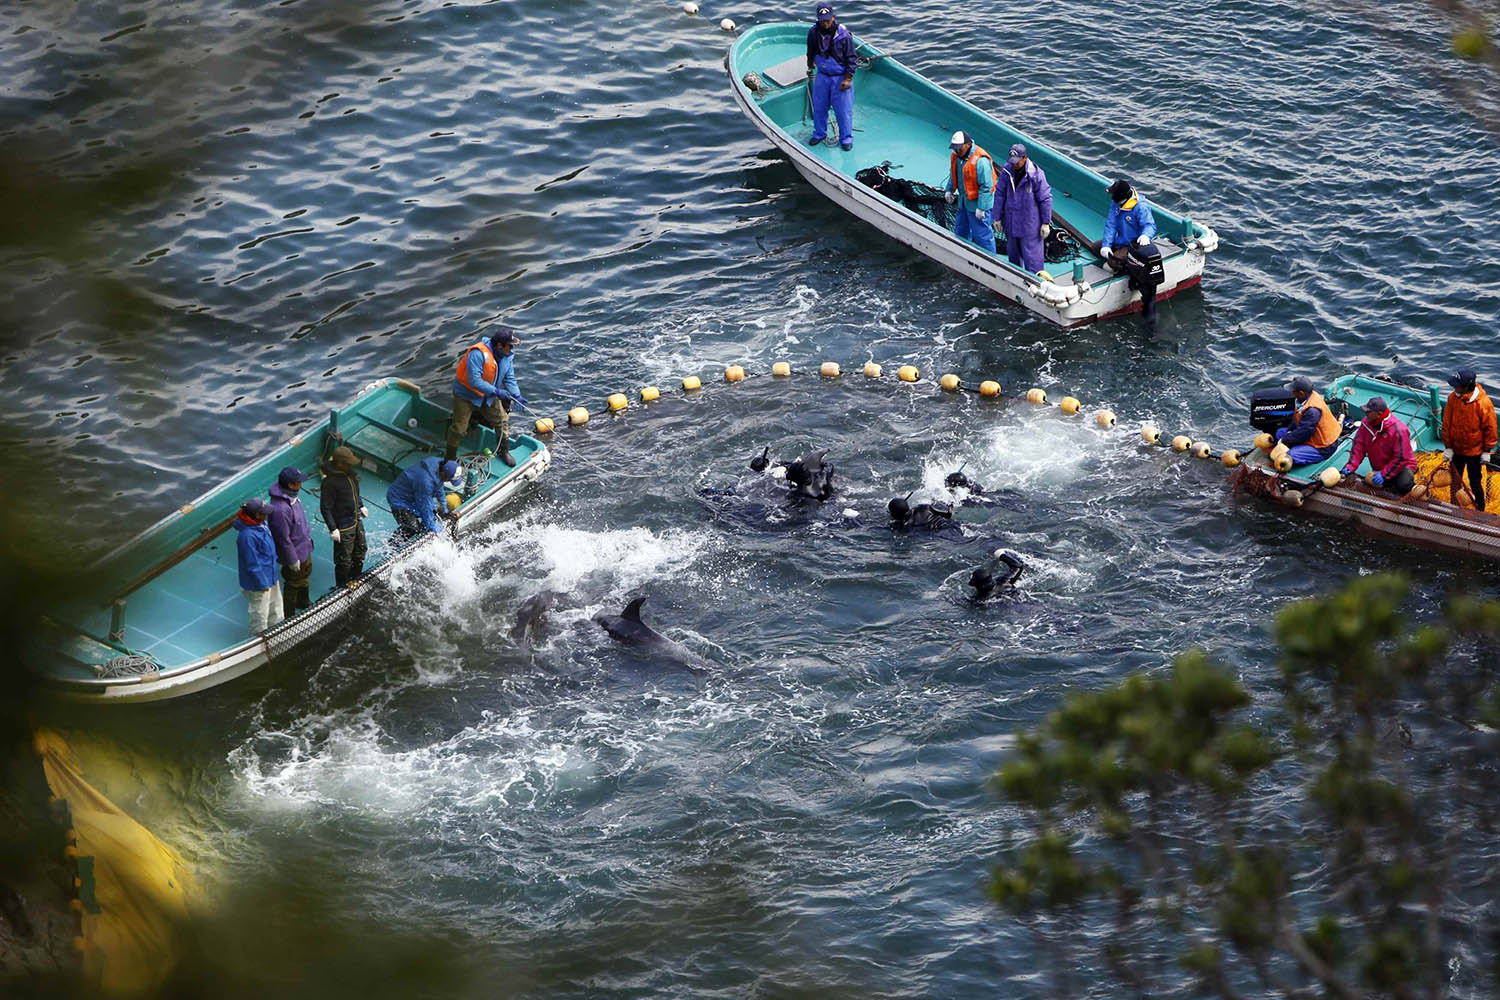 Jan. 20, 2014. Fishermen in wetsuits hunt dolphins at a cove in Taiji, western Japan.